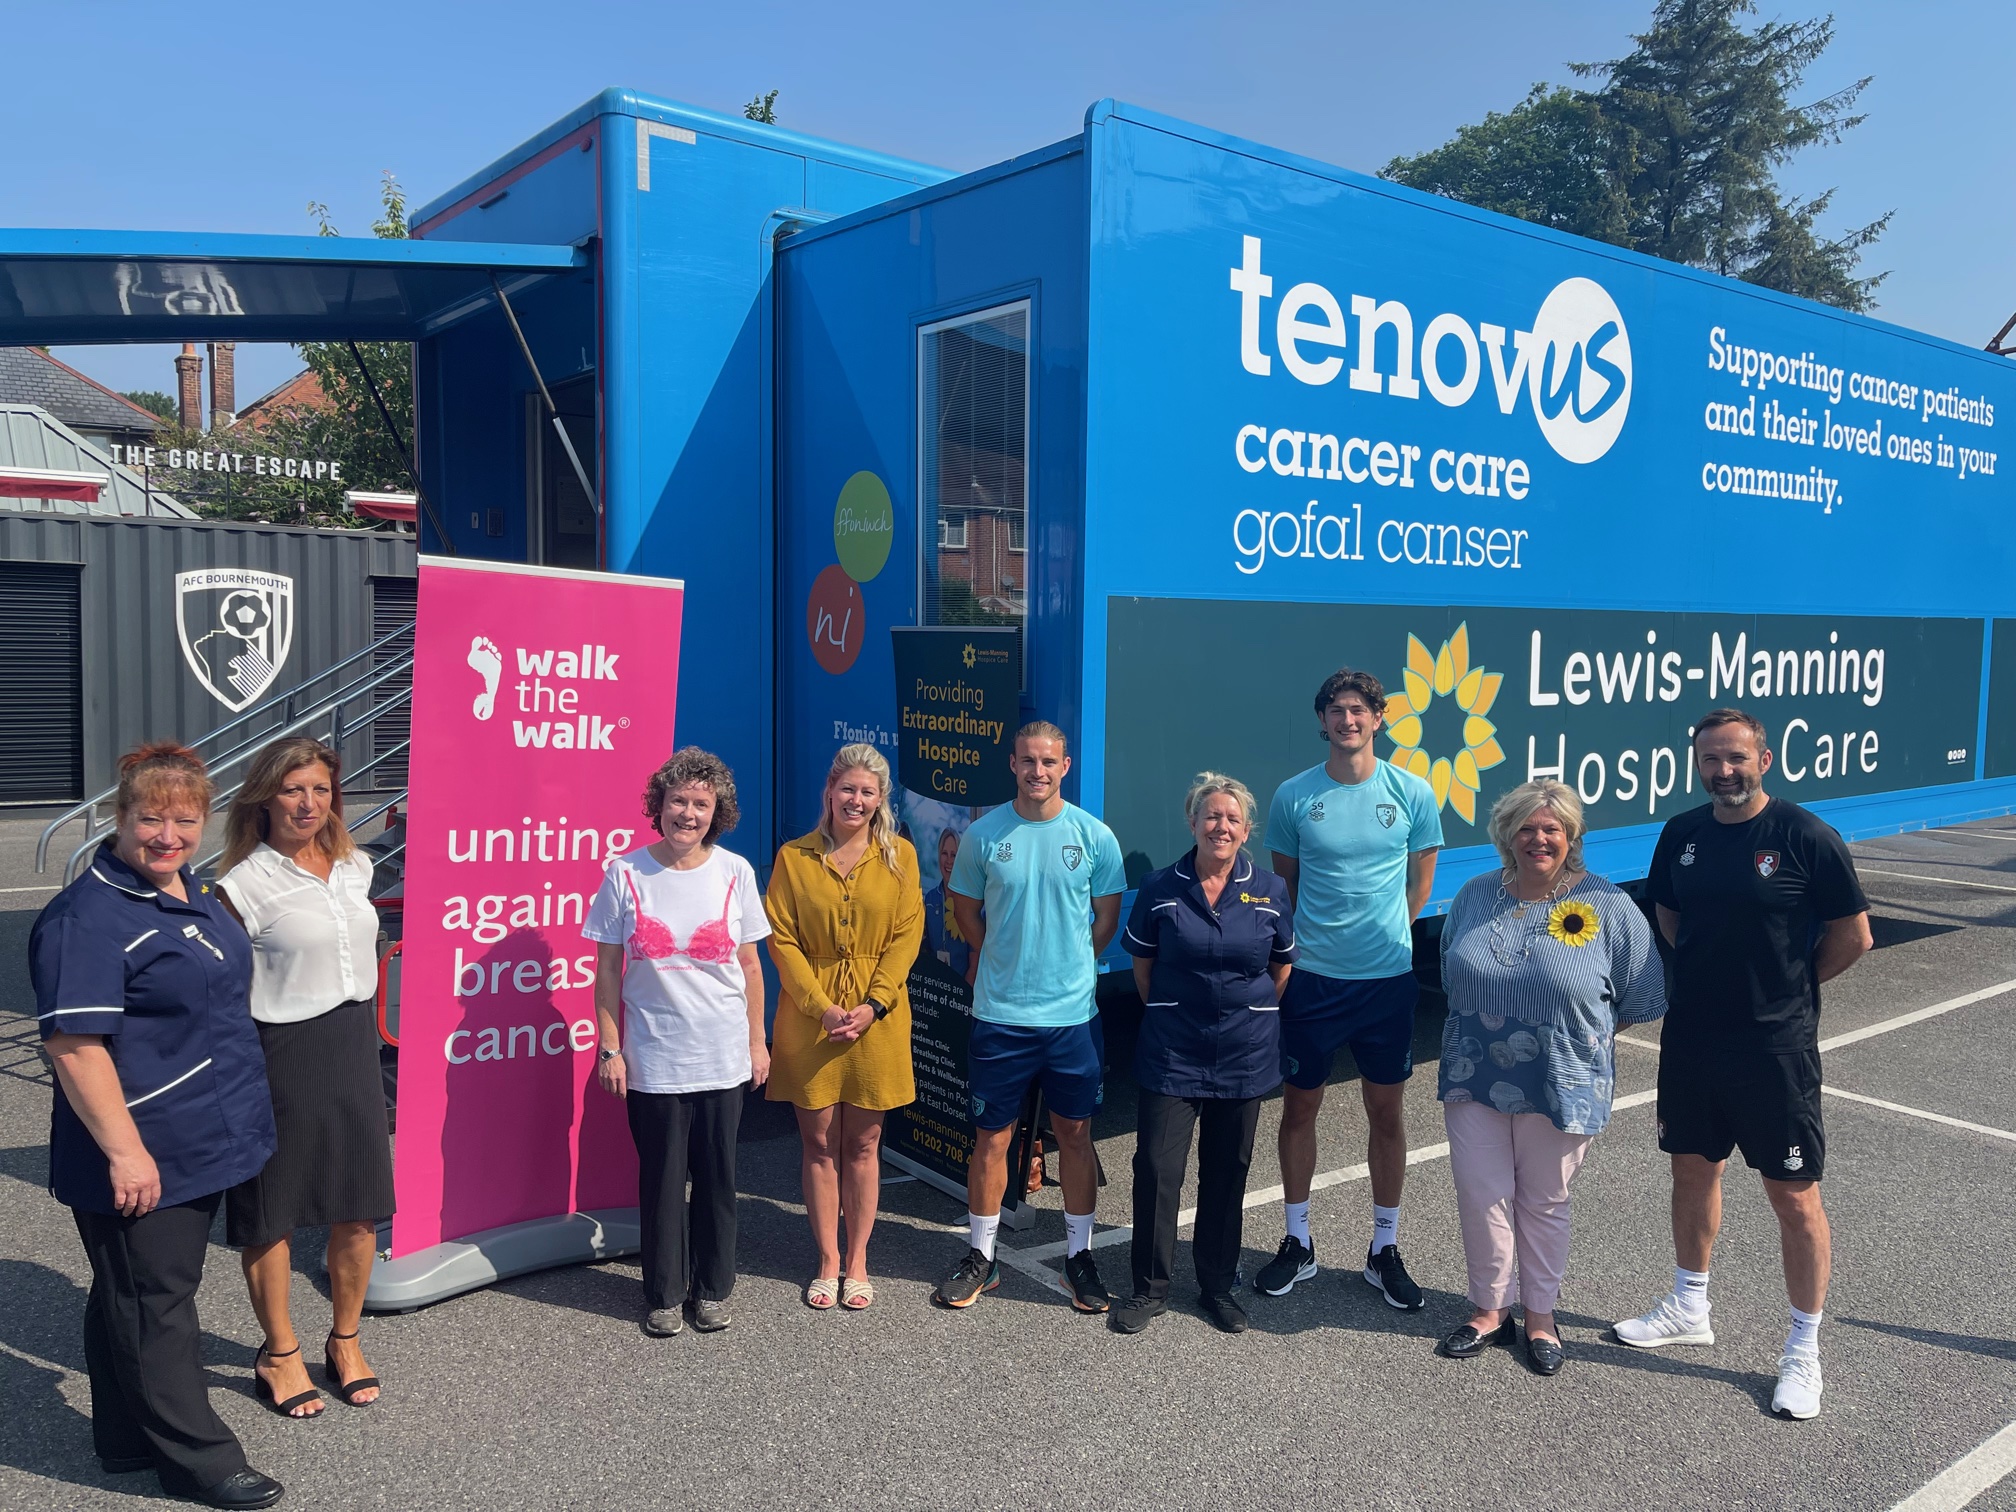 ​‘Walk the Walk’ charity enables extension to Lewis-Manning Hospice Care’s Mobile Lymphoedema Clinic to support cancer patients, with additional support by AFC Bournemouth